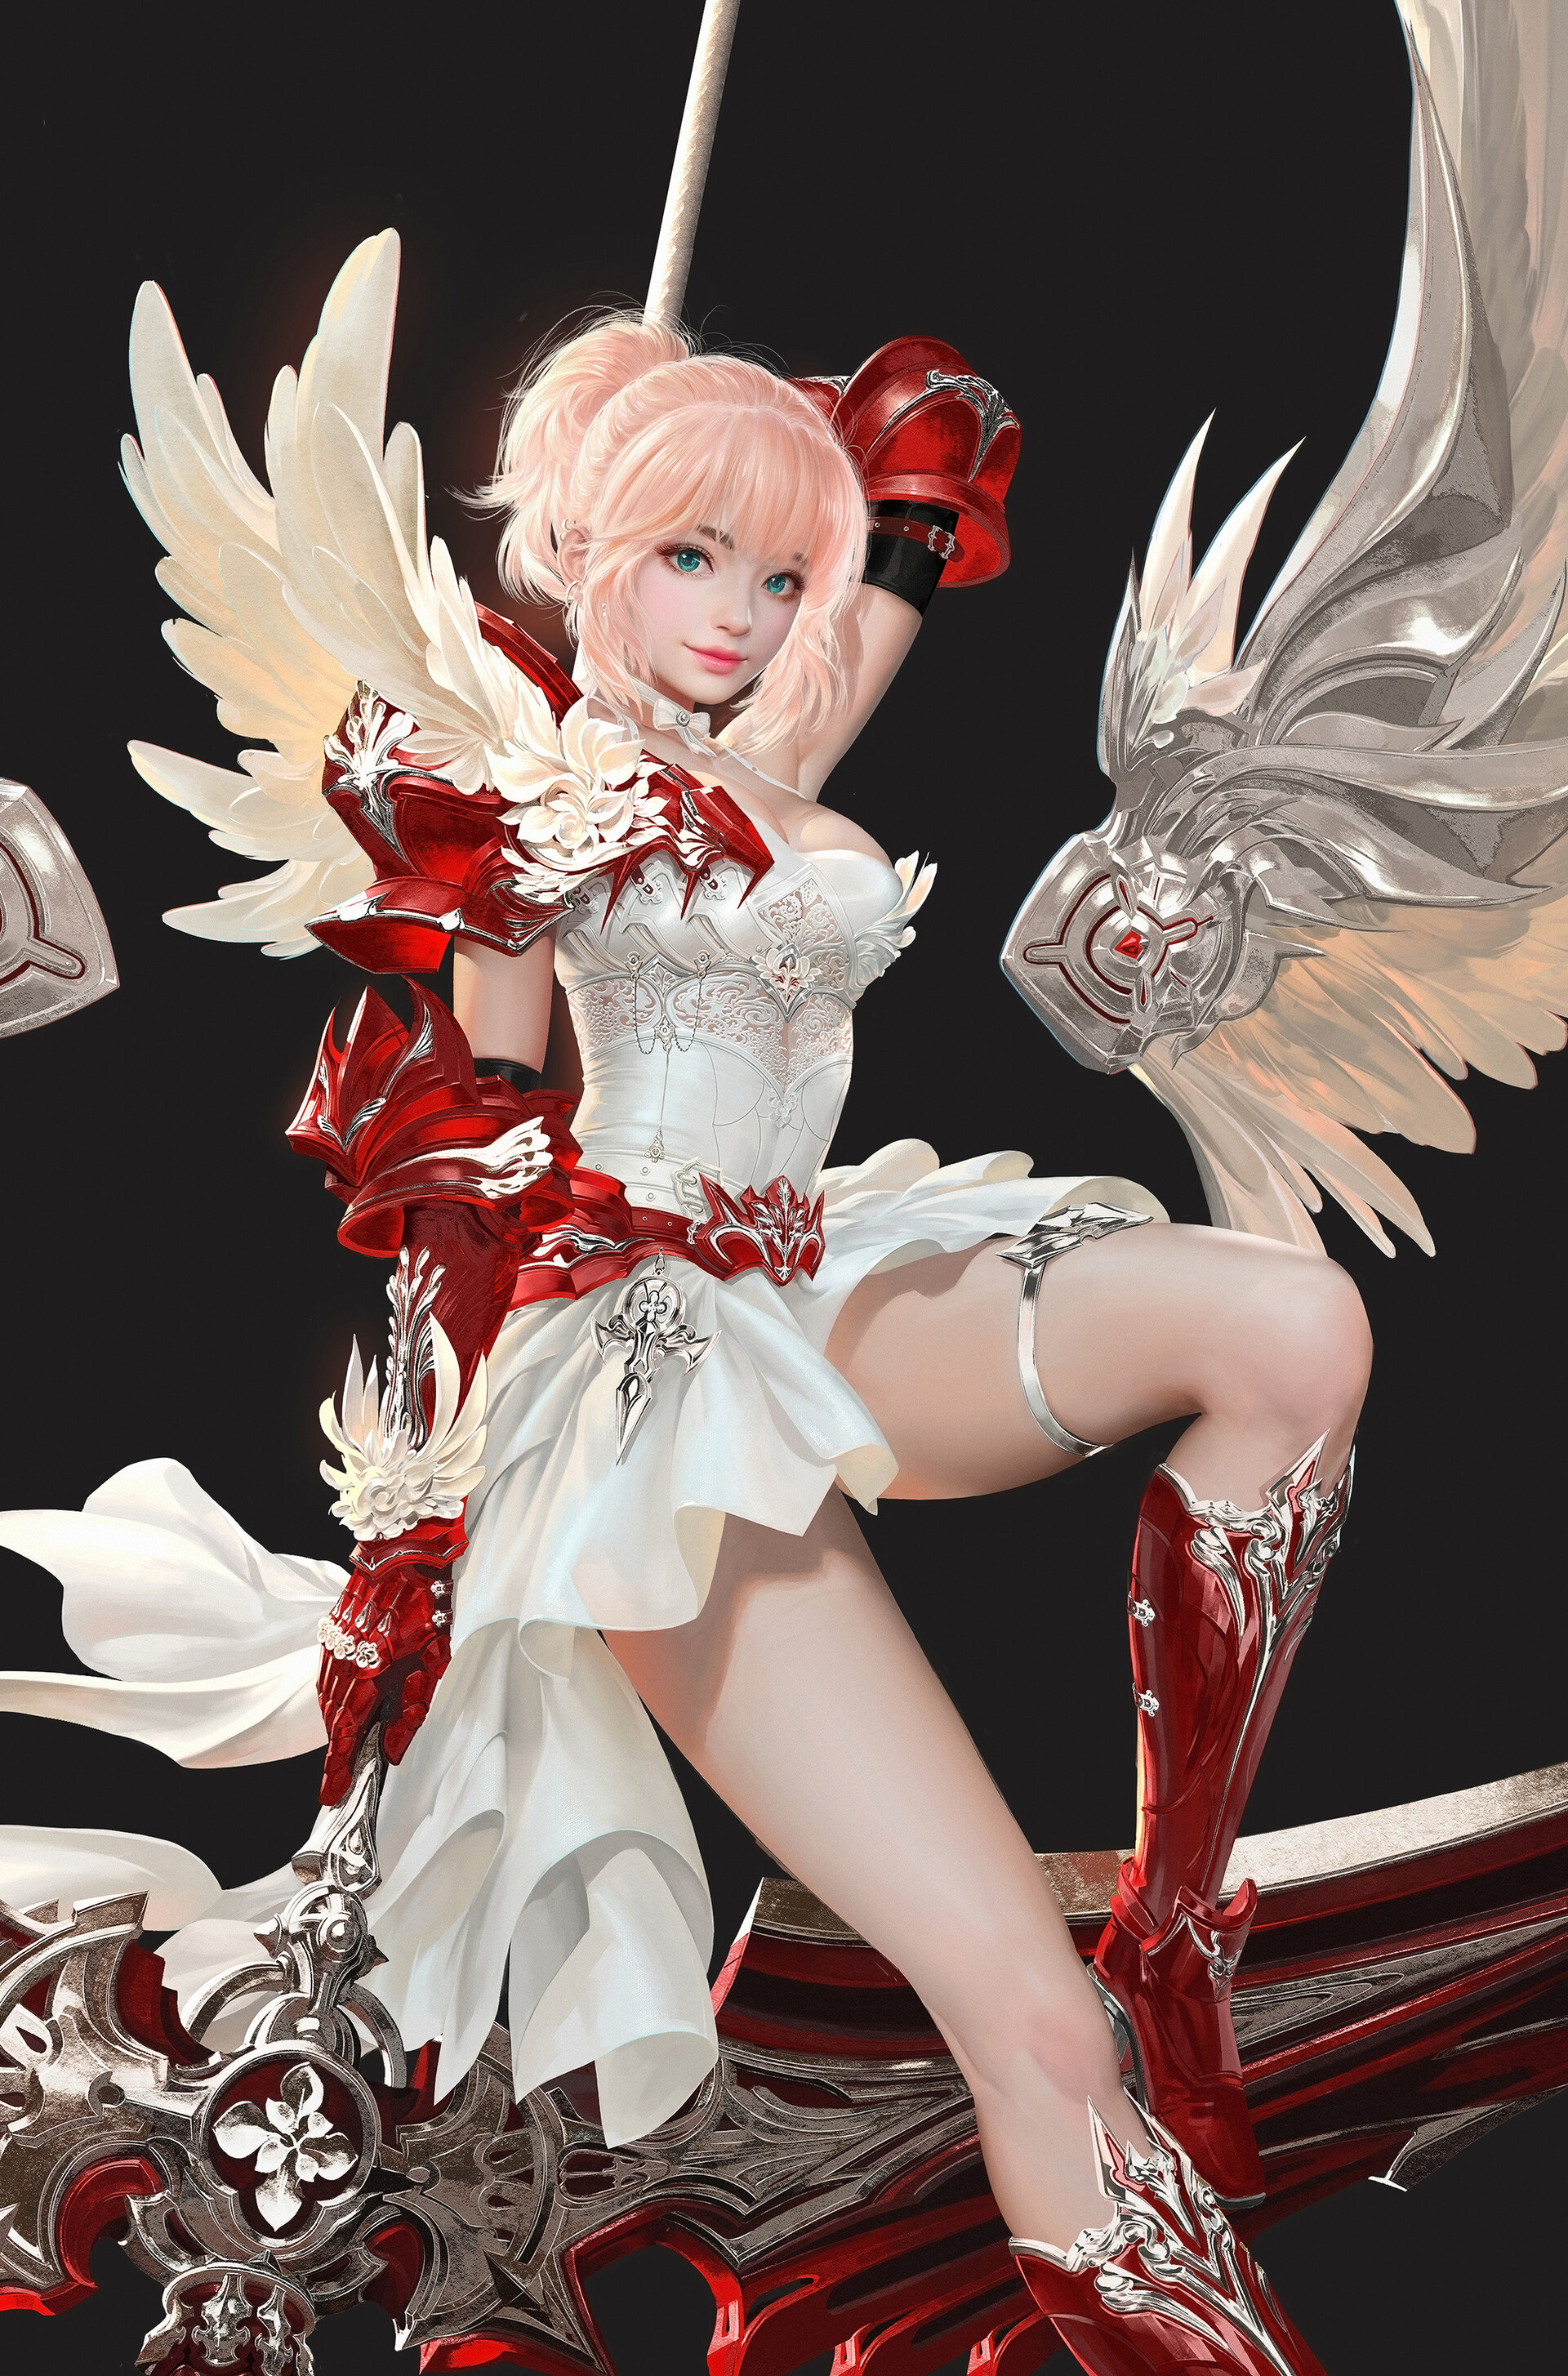 General 1920x2909 drawing women pink hair smiling blue eyes wings weapon armor knee-high boots skirt looking at viewer pink lipstick legs fantasy girl scythe fantasy weapon